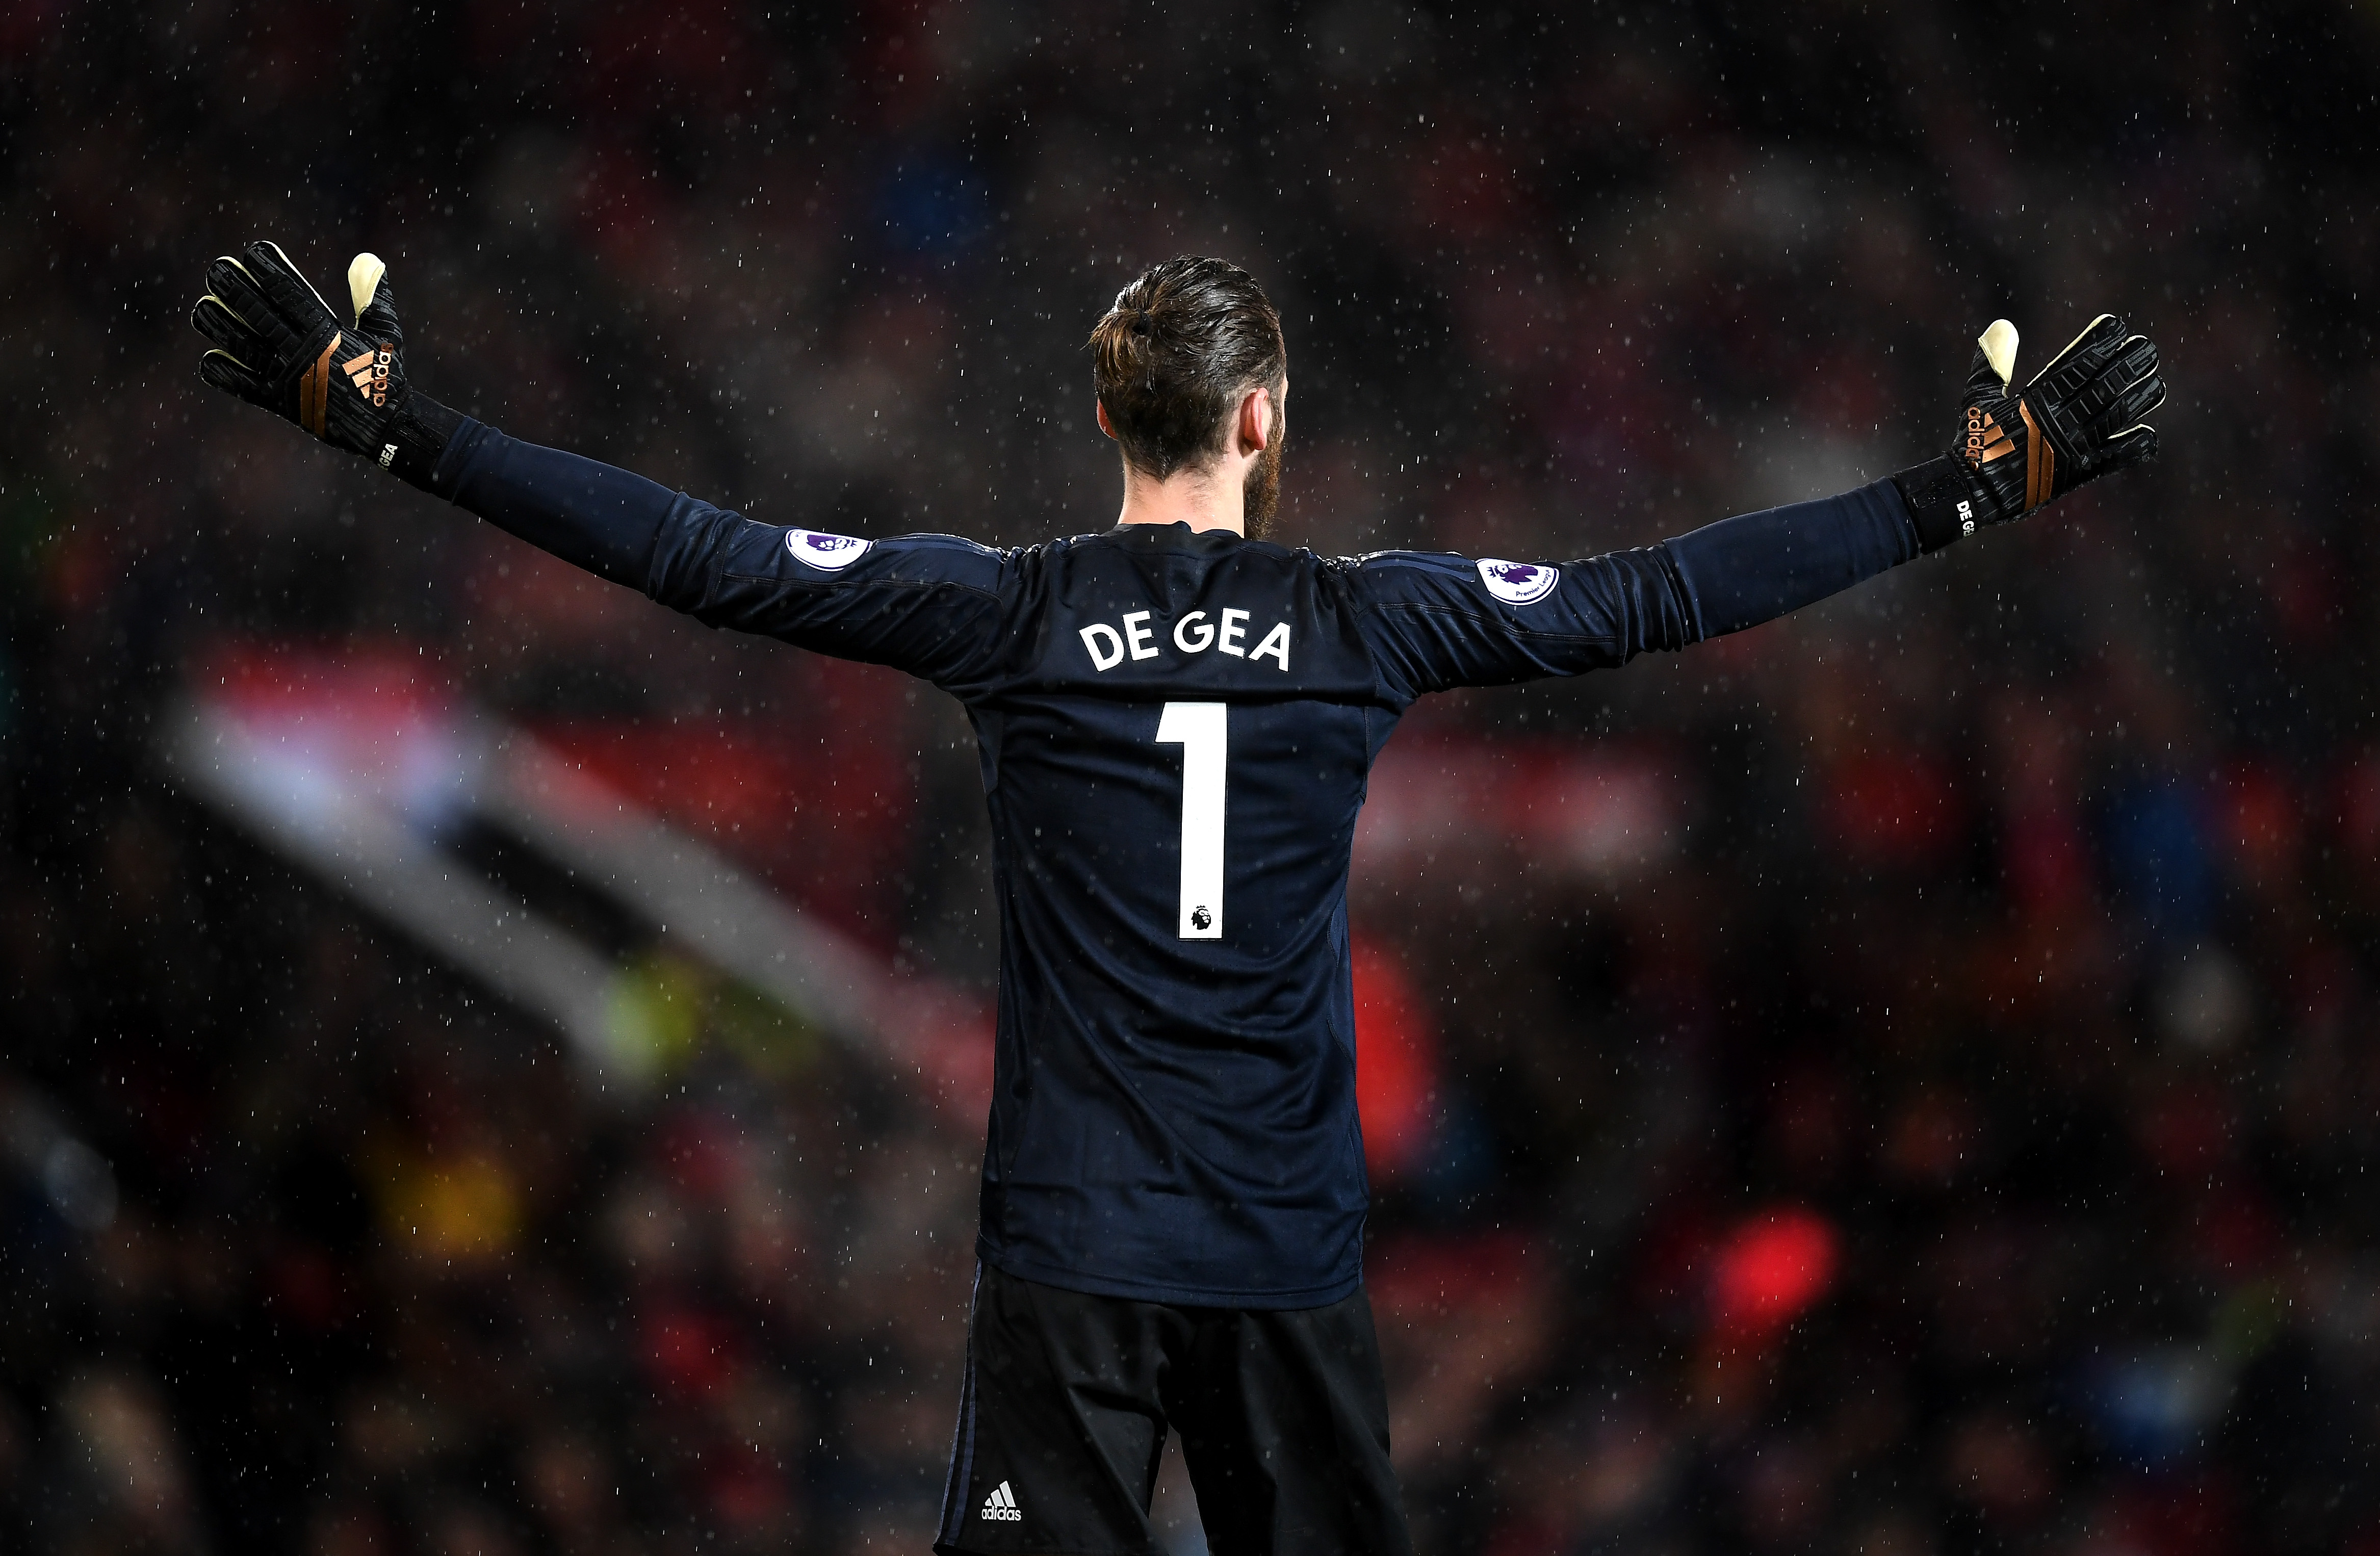 MANCHESTER, ENGLAND - JANUARY 15: David De Gea of Manchester United reacts during the Premier League match between Manchester United and Stoke City at Old Trafford on January 15, 2018 in Manchester, England.  (Photo by Michael Regan/Getty Images)